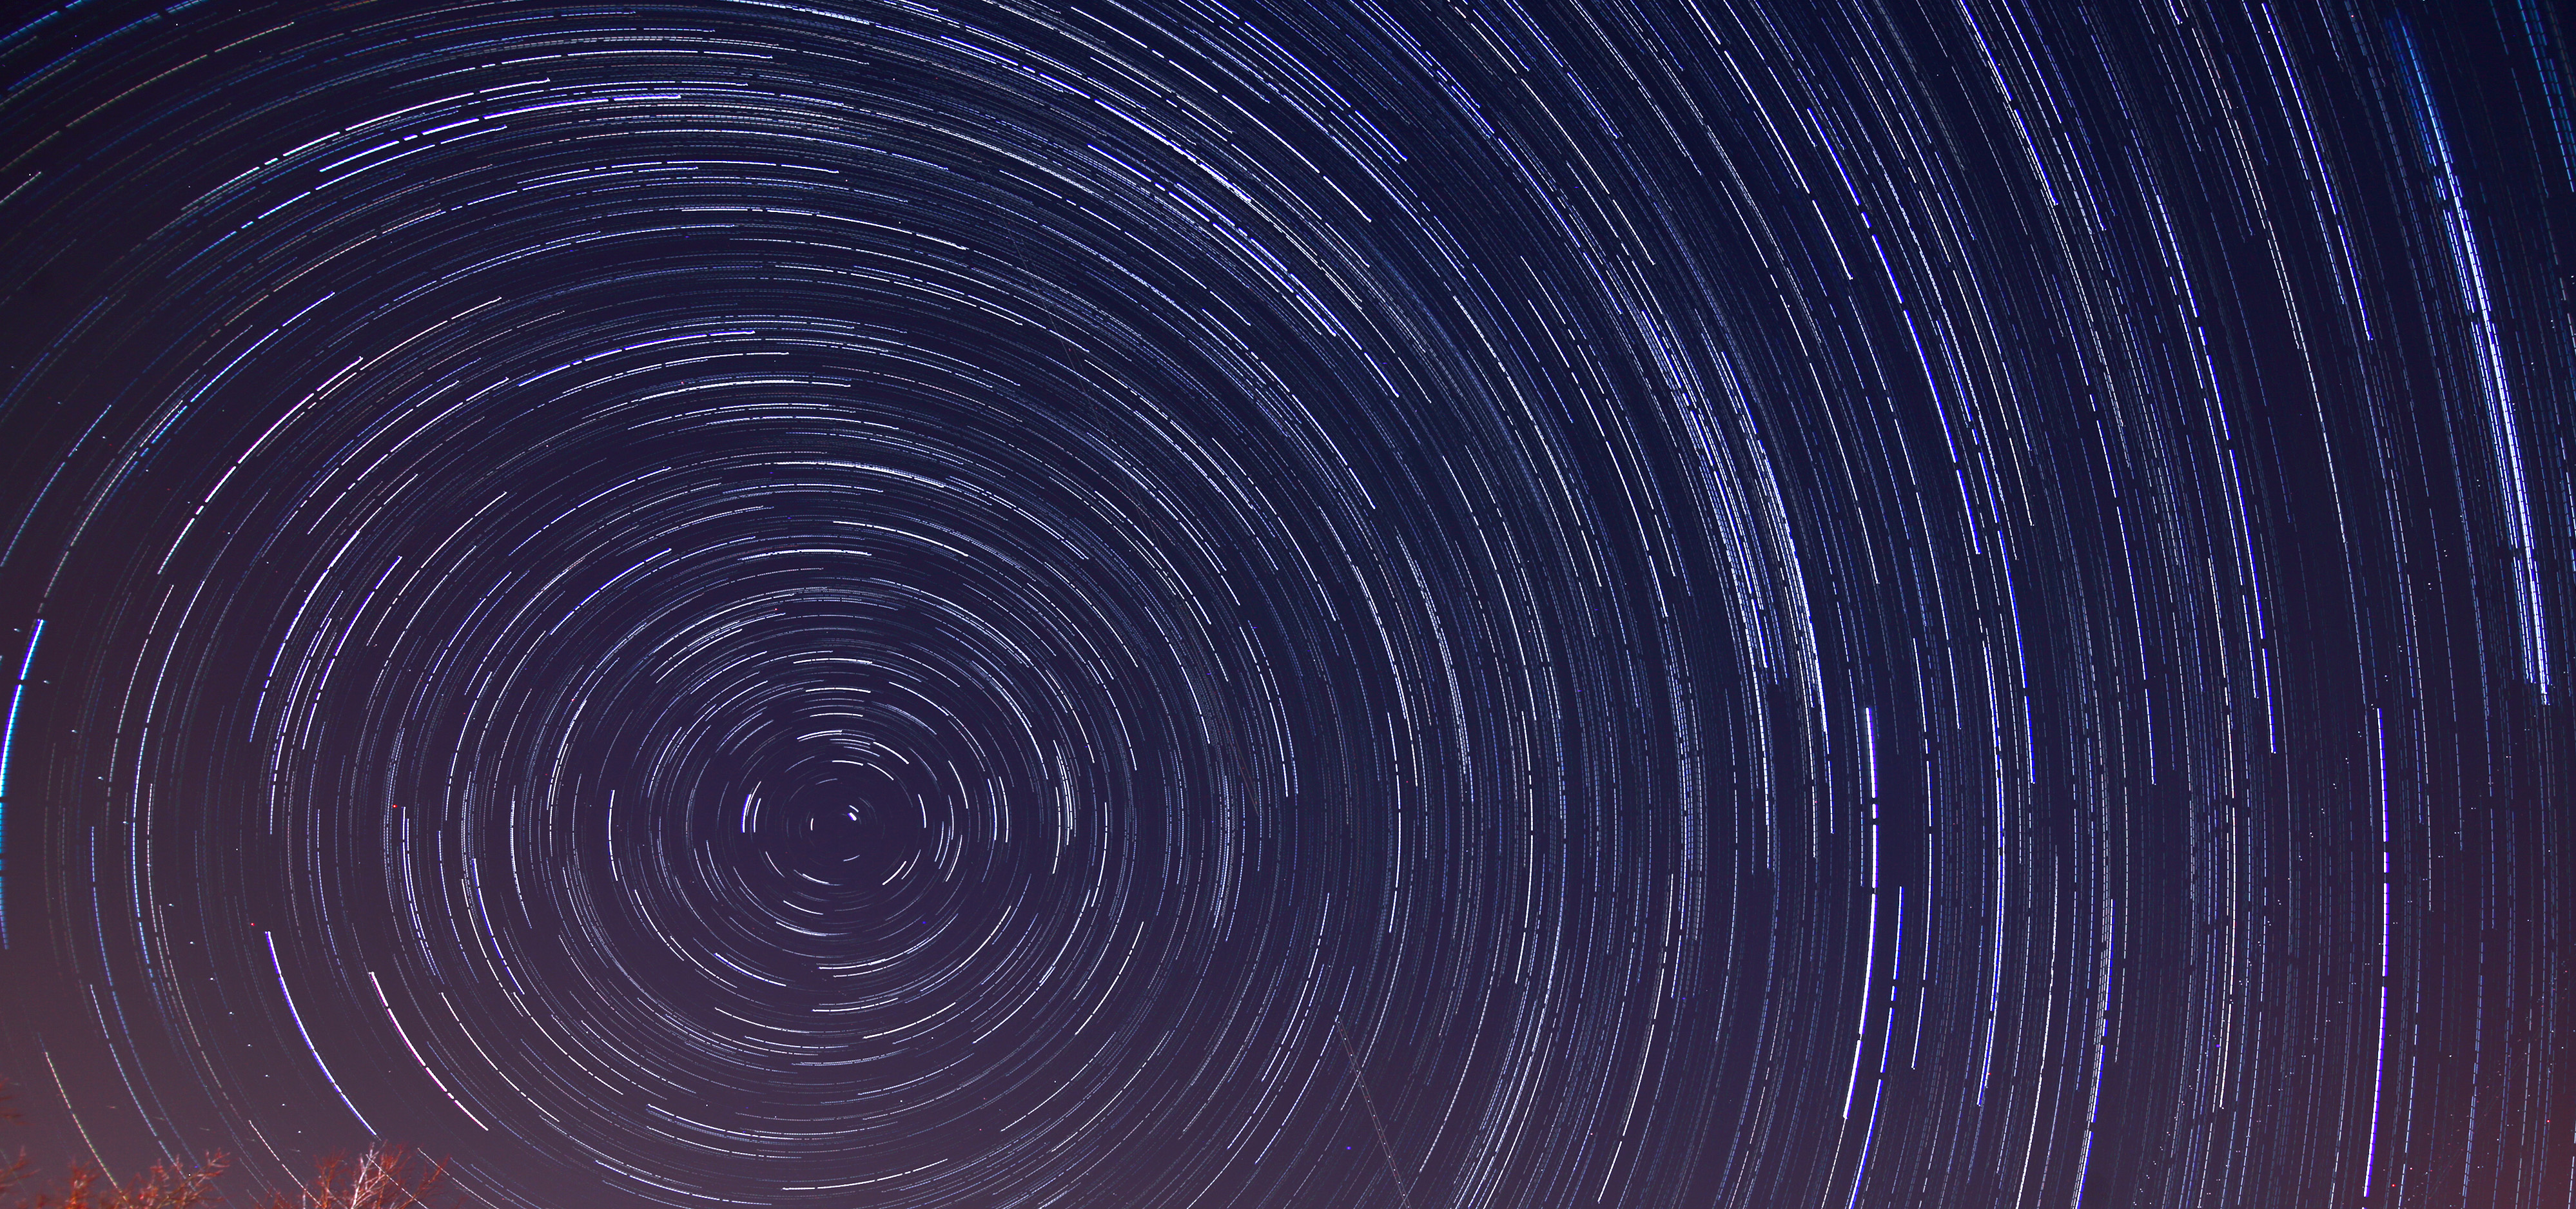 Star Trails Spinning in the sky image - Free stock photo - Public ...